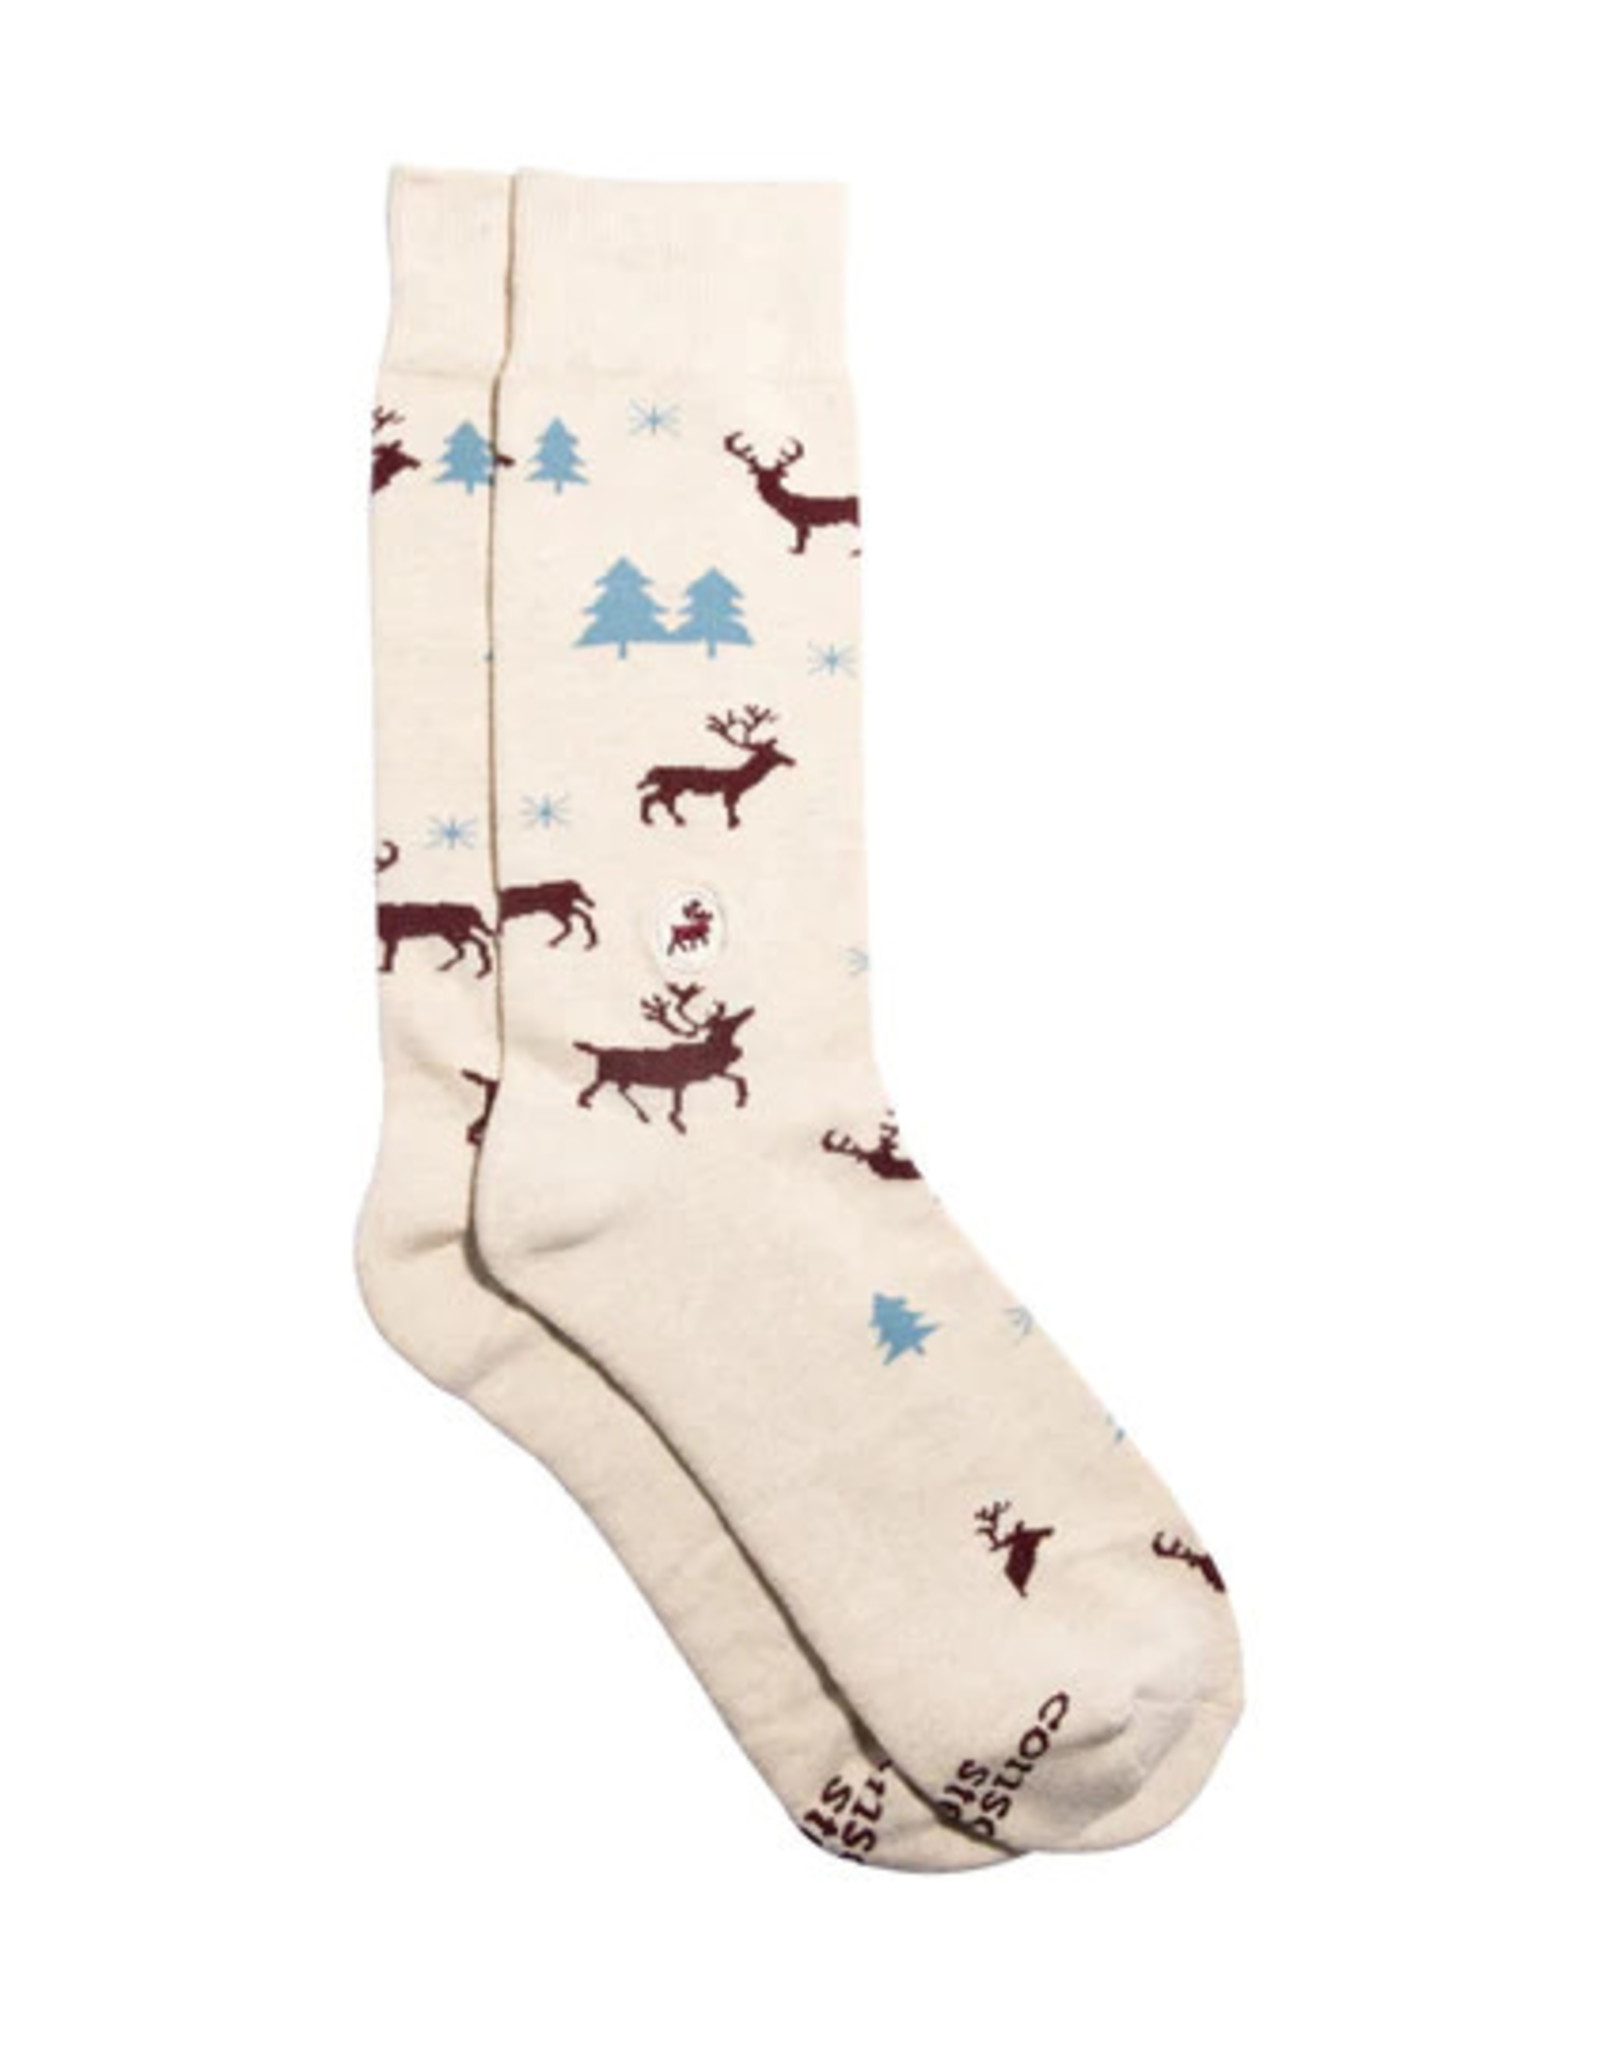 Conscious Step Socks that Protect the Arctic (Reindeer)